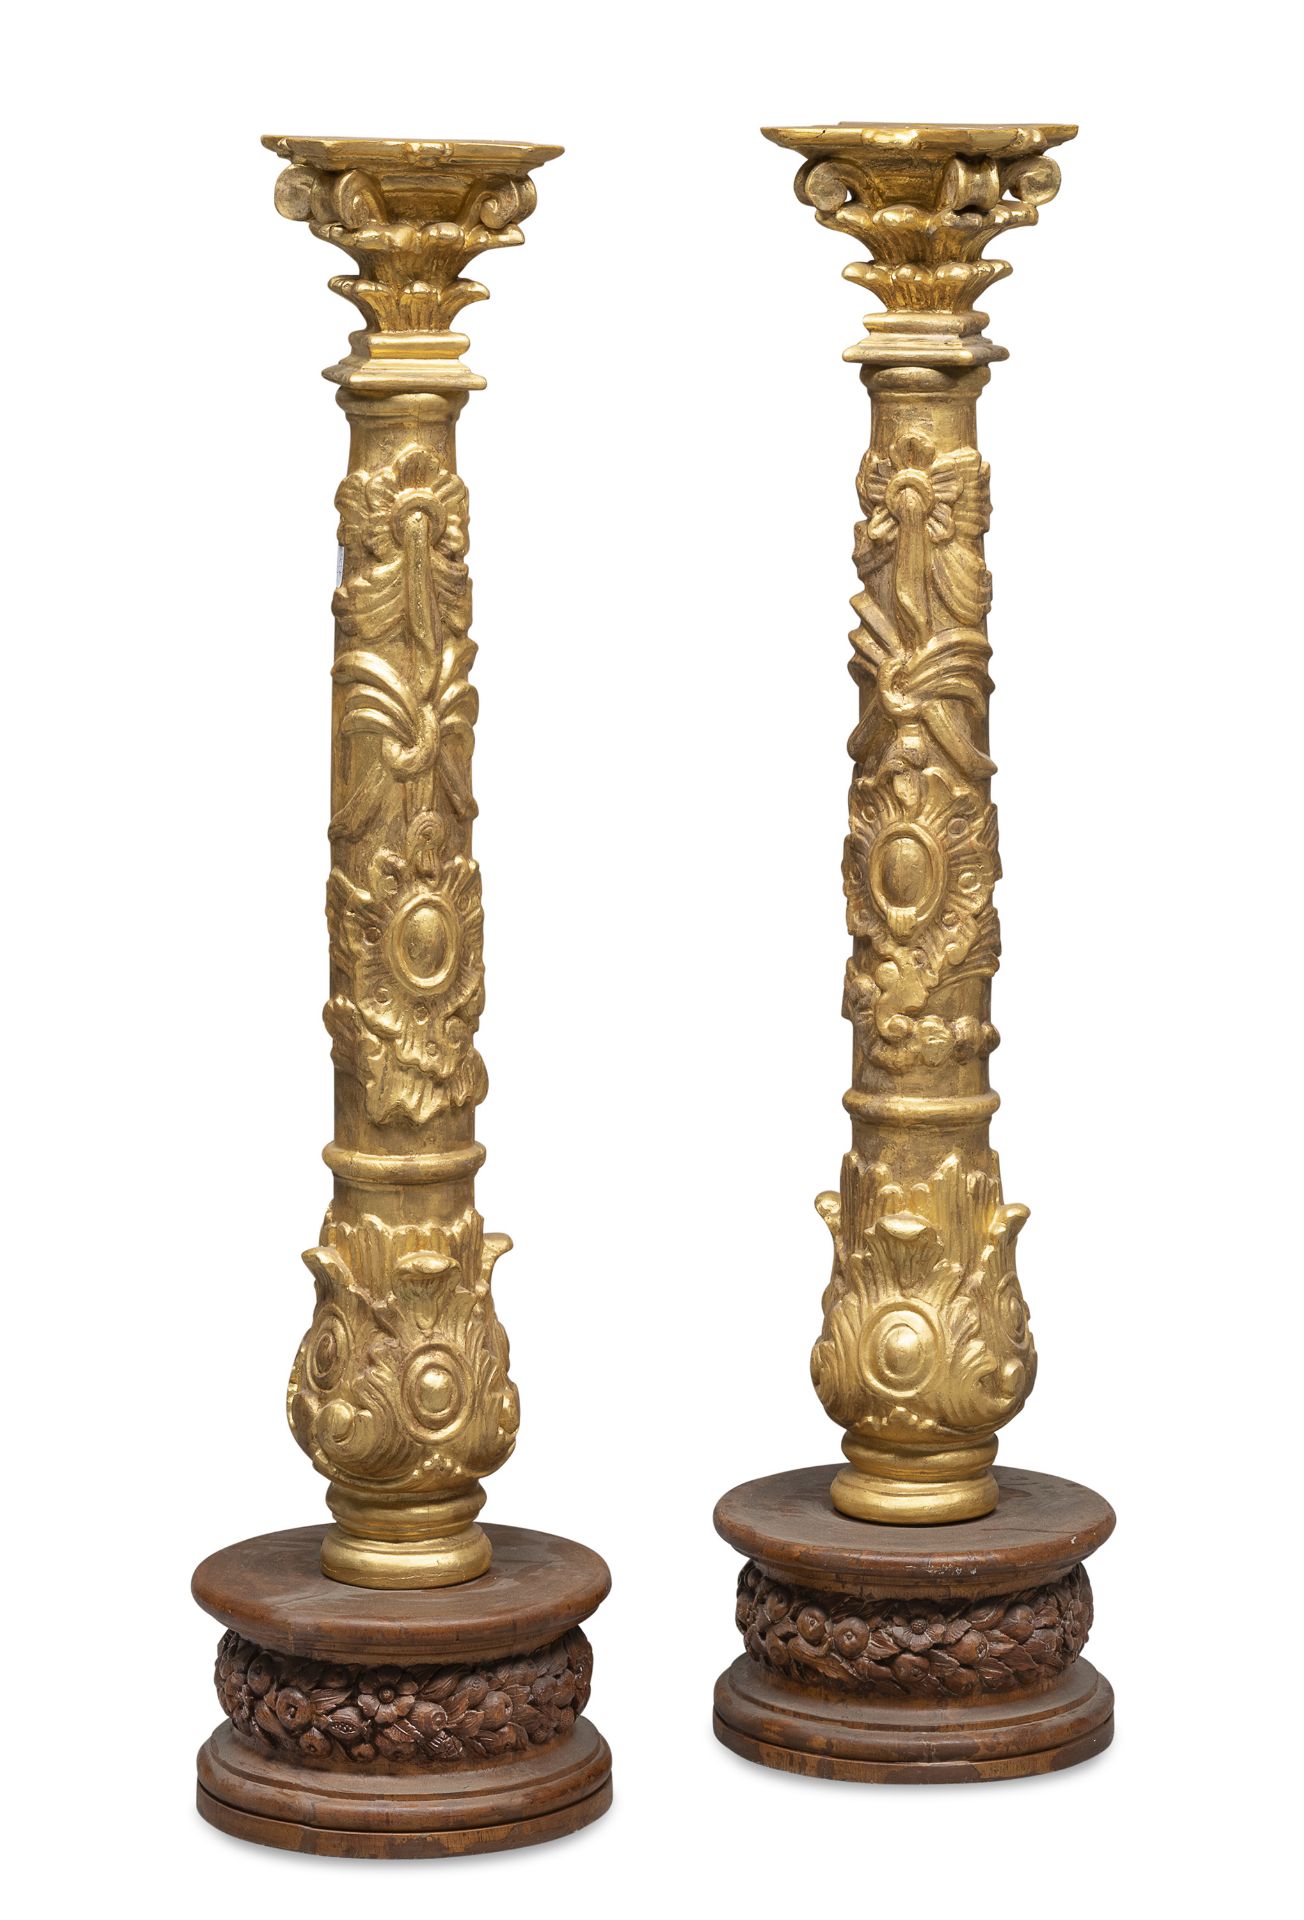 PAIR OF GILTWOOD COLUMNS LATE 18TH CENTURY